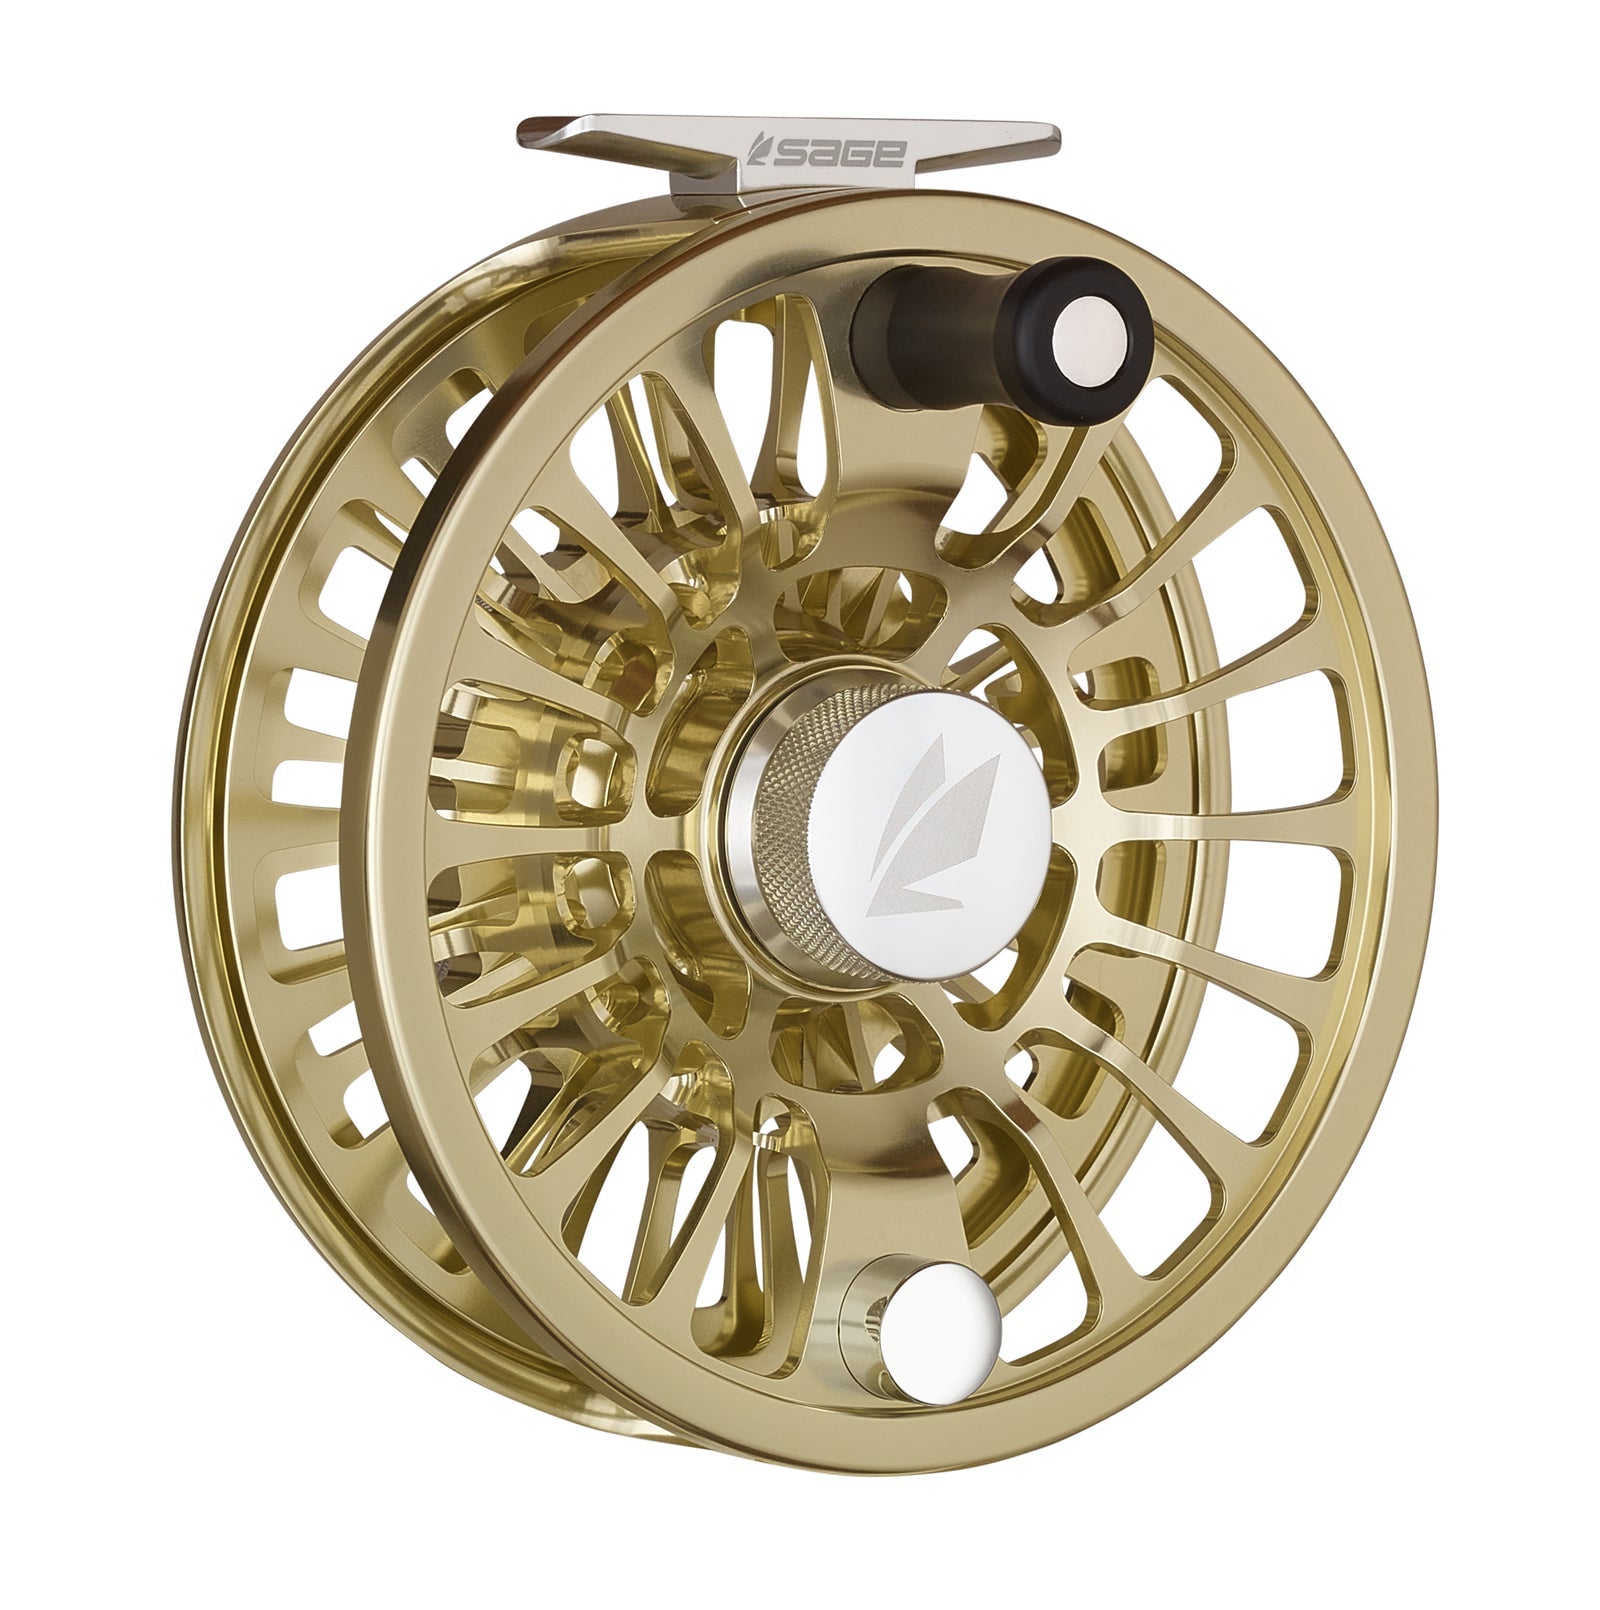 SAGE THERMO Fly Reel 12-16 WT for Offshore/Bluewater - Champagne - NEW!